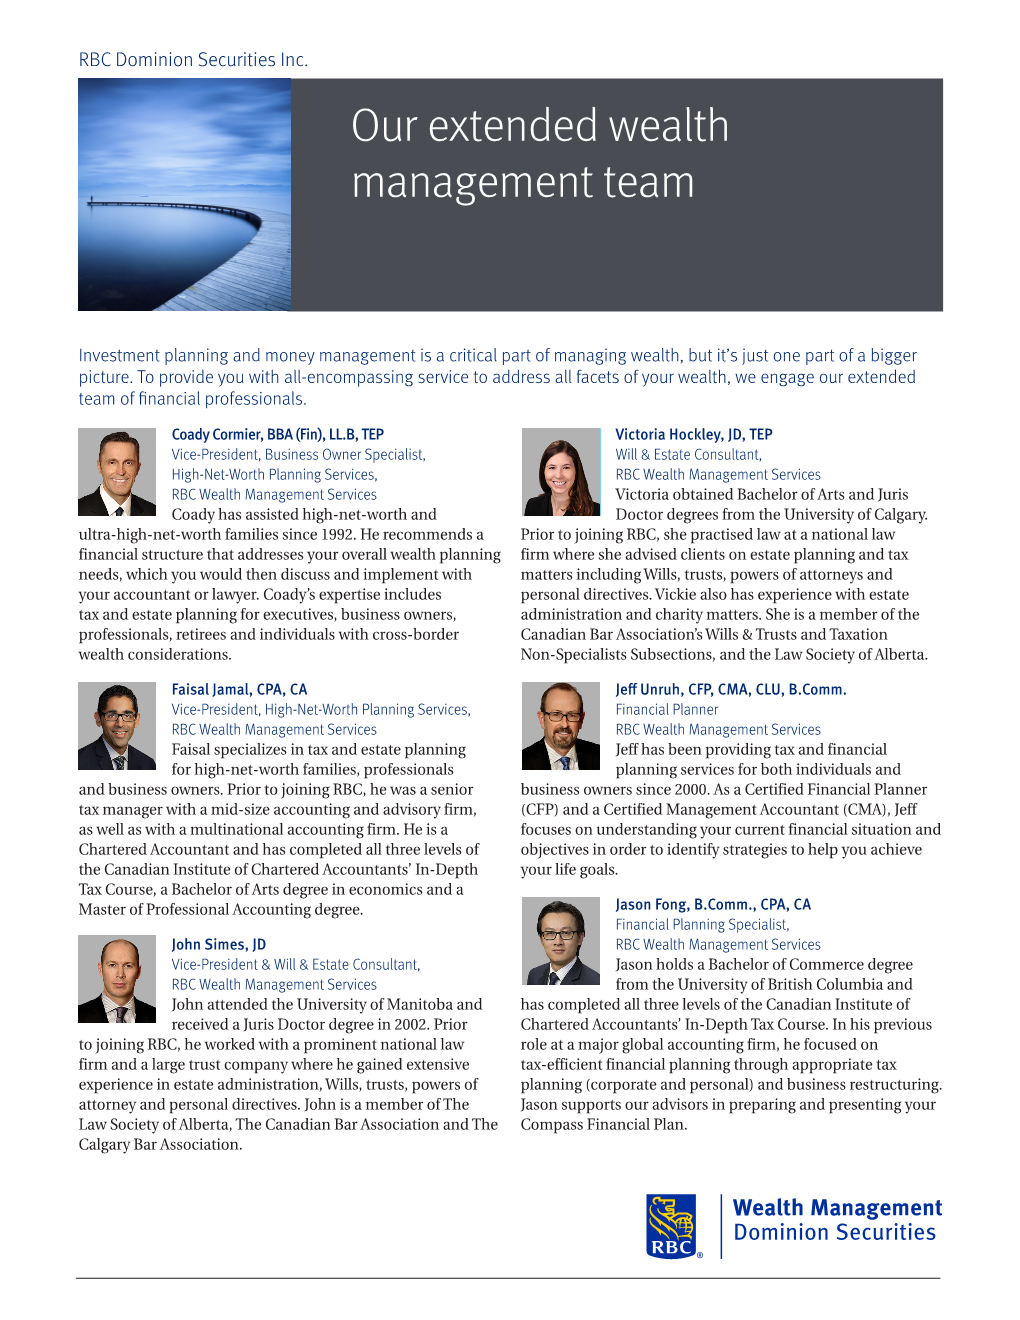 Our Extended Wealth Management Team